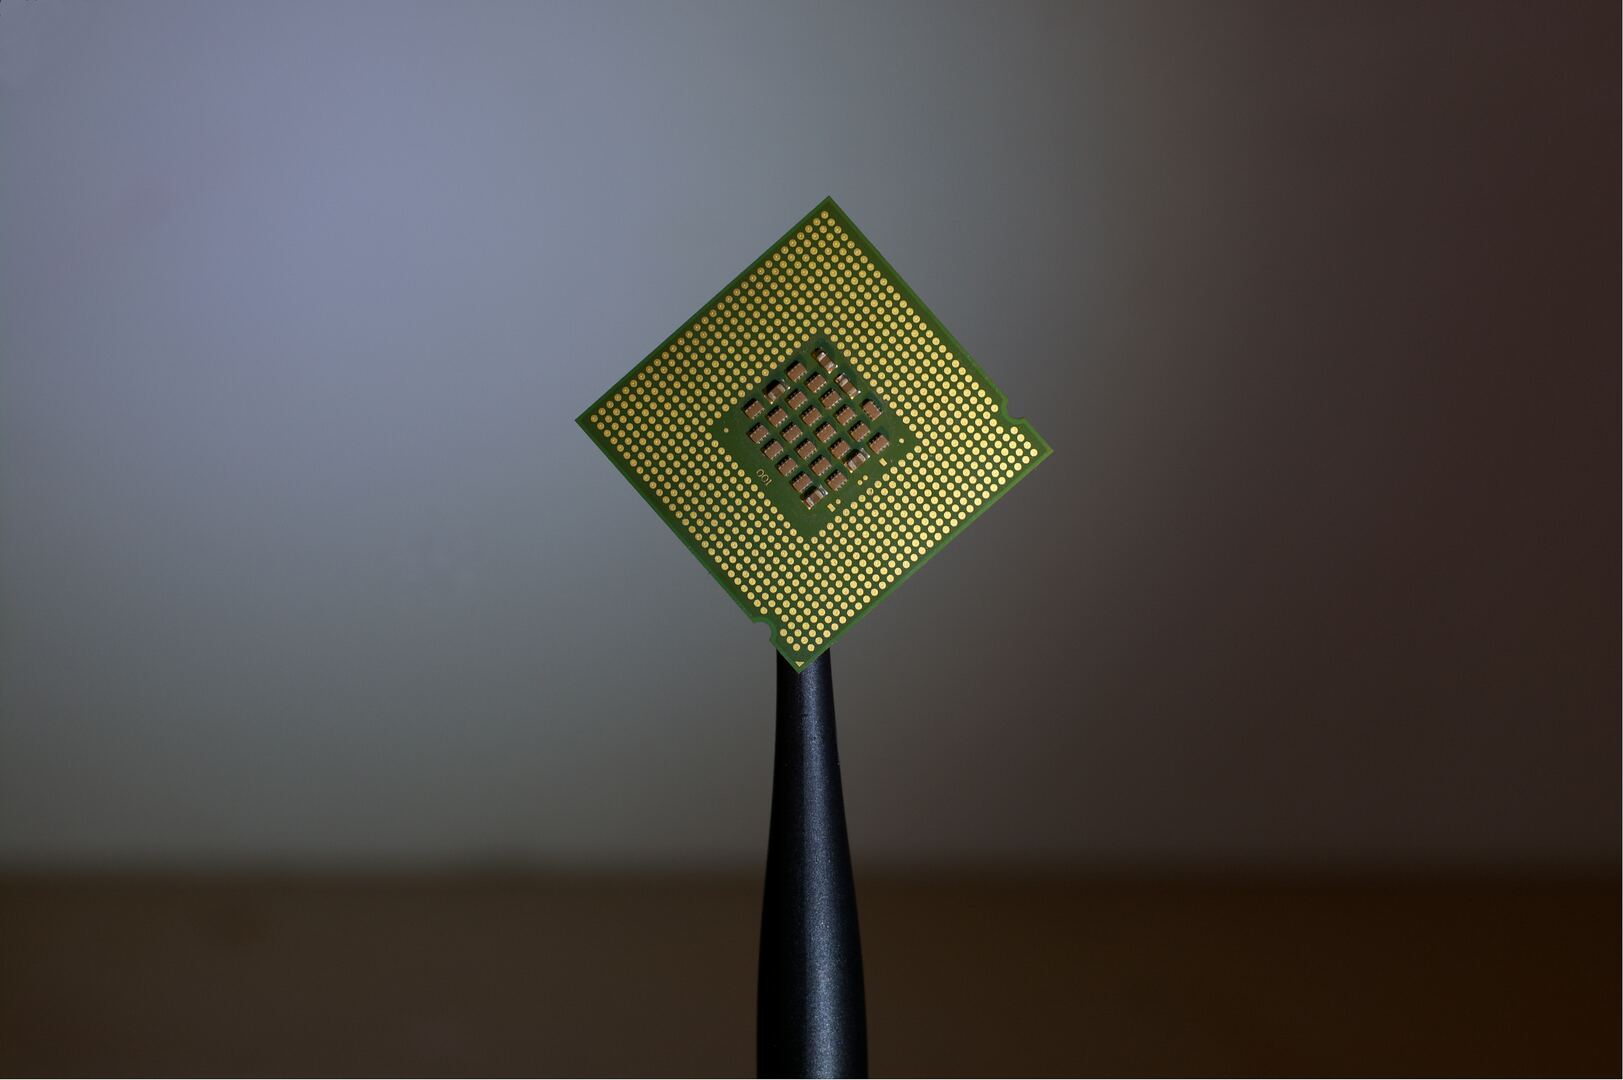 green-cool-image-microchip-cool-photo-chip-product-design-1410143-pxhere.com(1).jpg